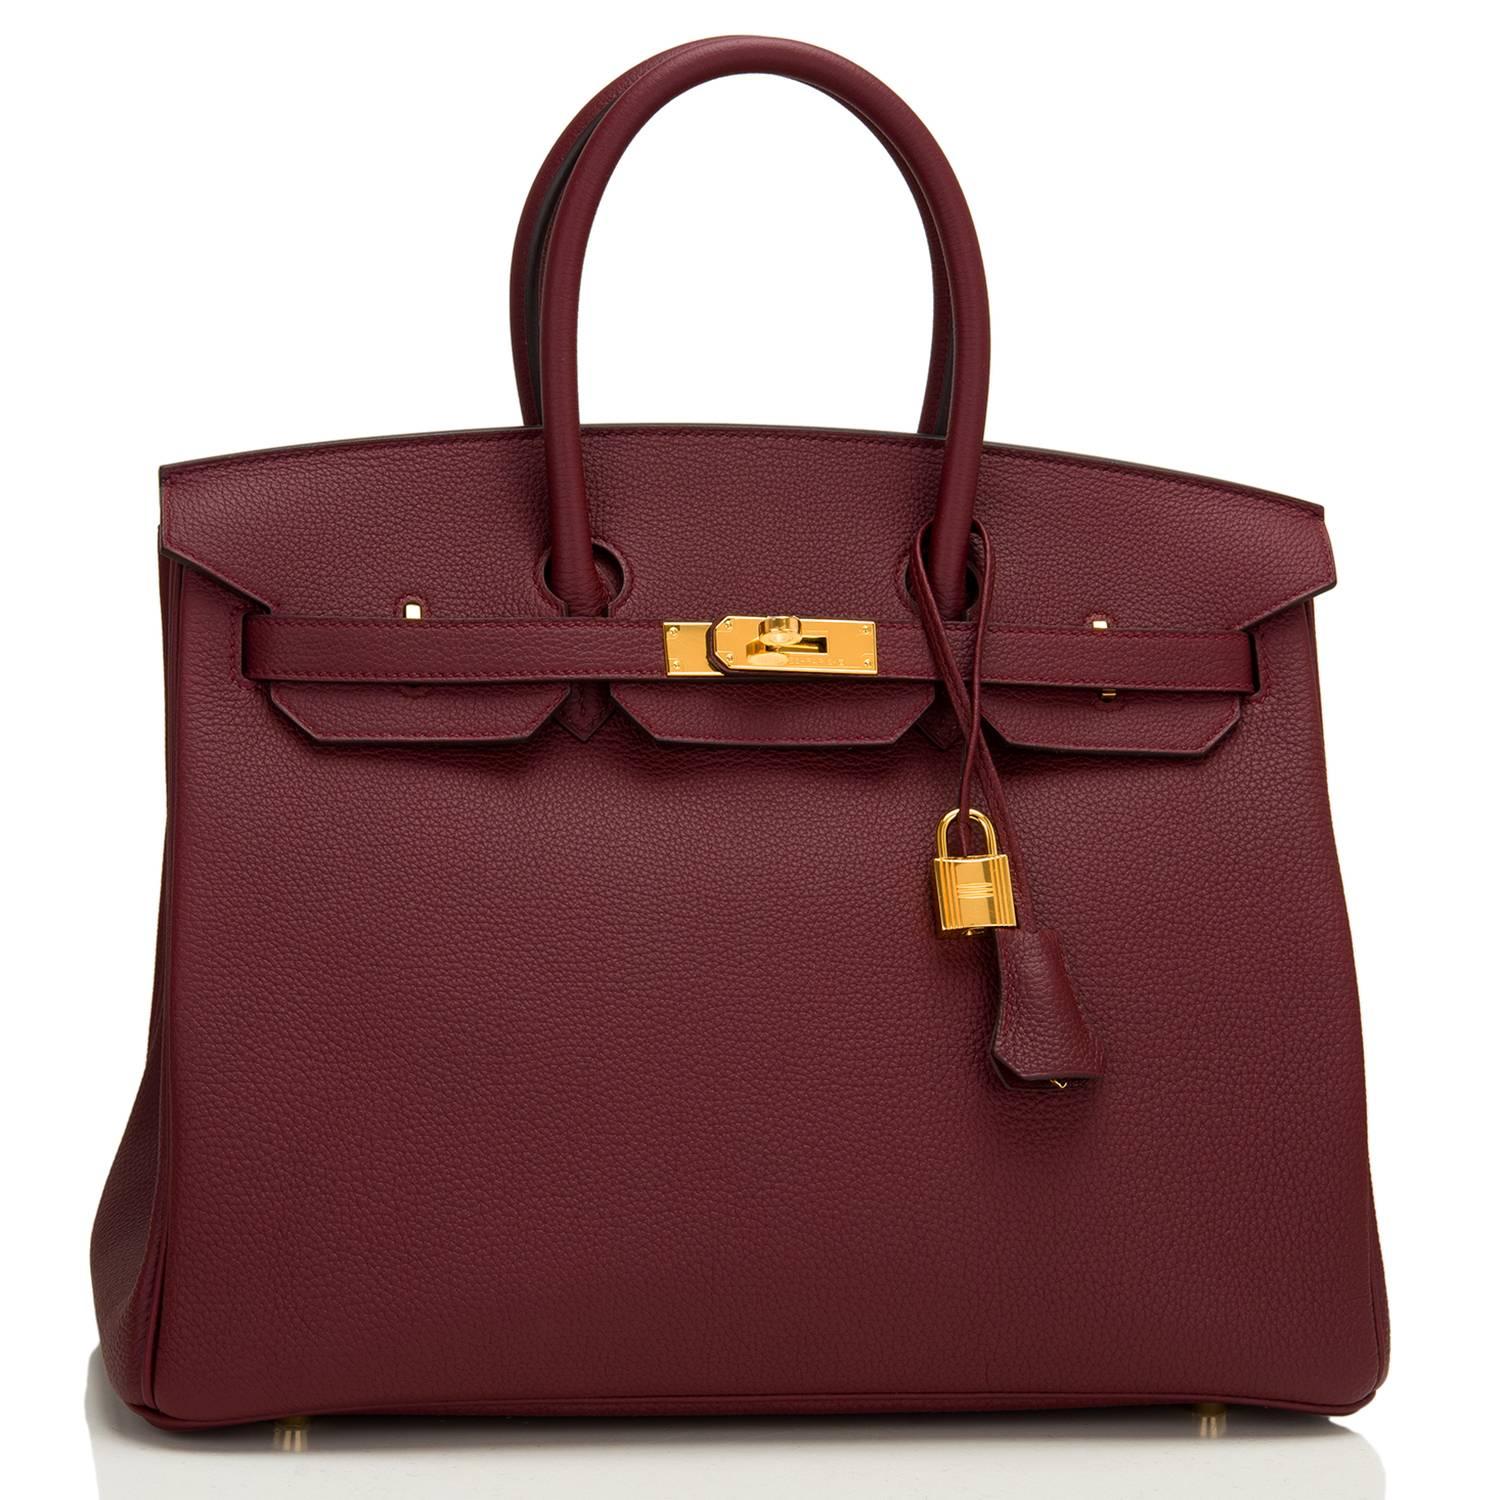 Hermes Bordeaux Birkin 35cm of togo leather and gold hardware.

This Birkin has tonal stitching, a front toggle closure, a clochette with lock and two keys, and double rolled handles.

The interior is lined with Bordeaux chevre and has one zip